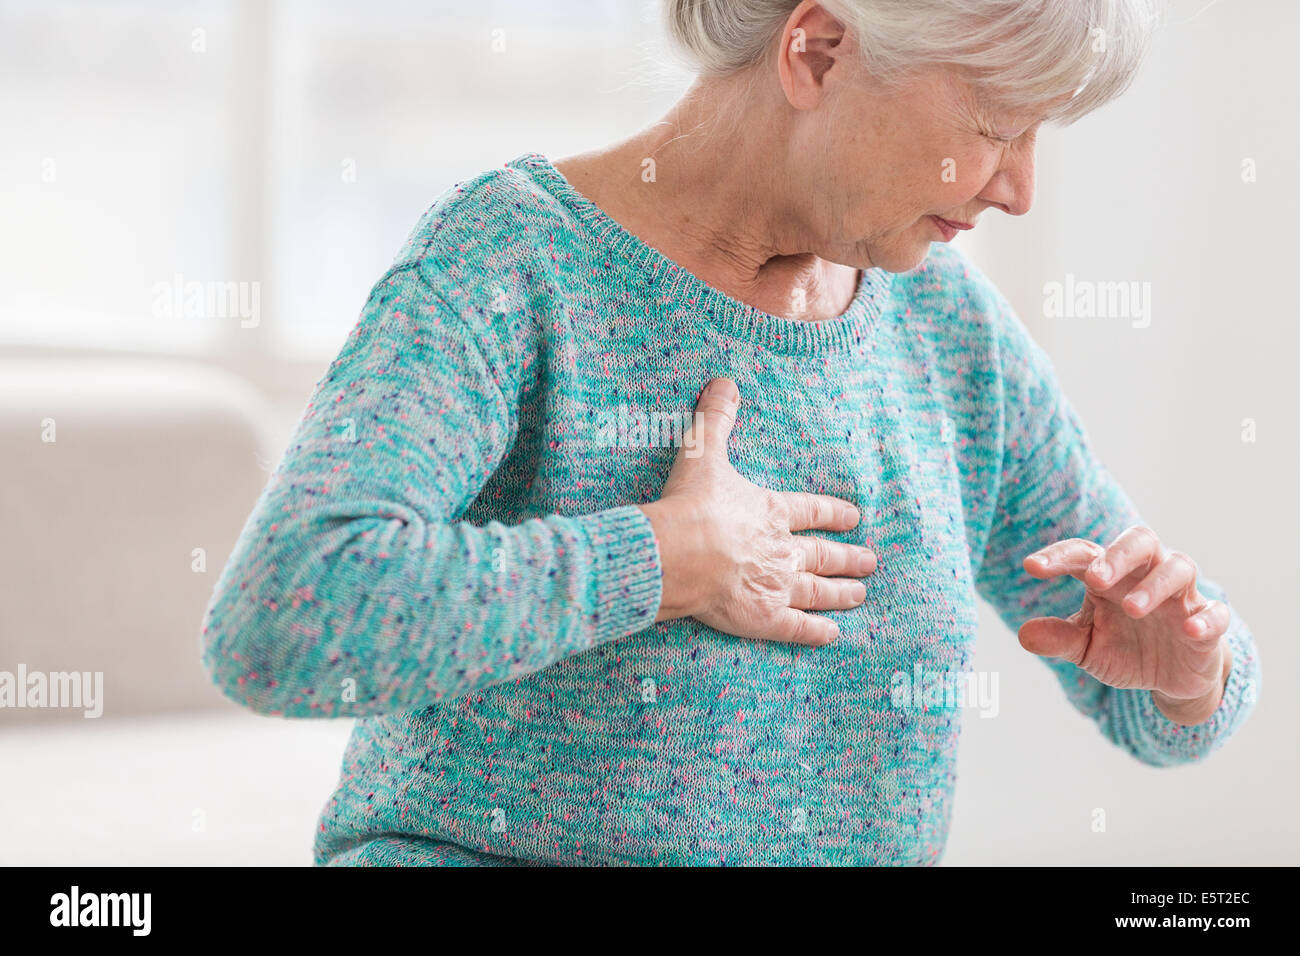 Woman suffering from a mild heart attack. Stock Photo